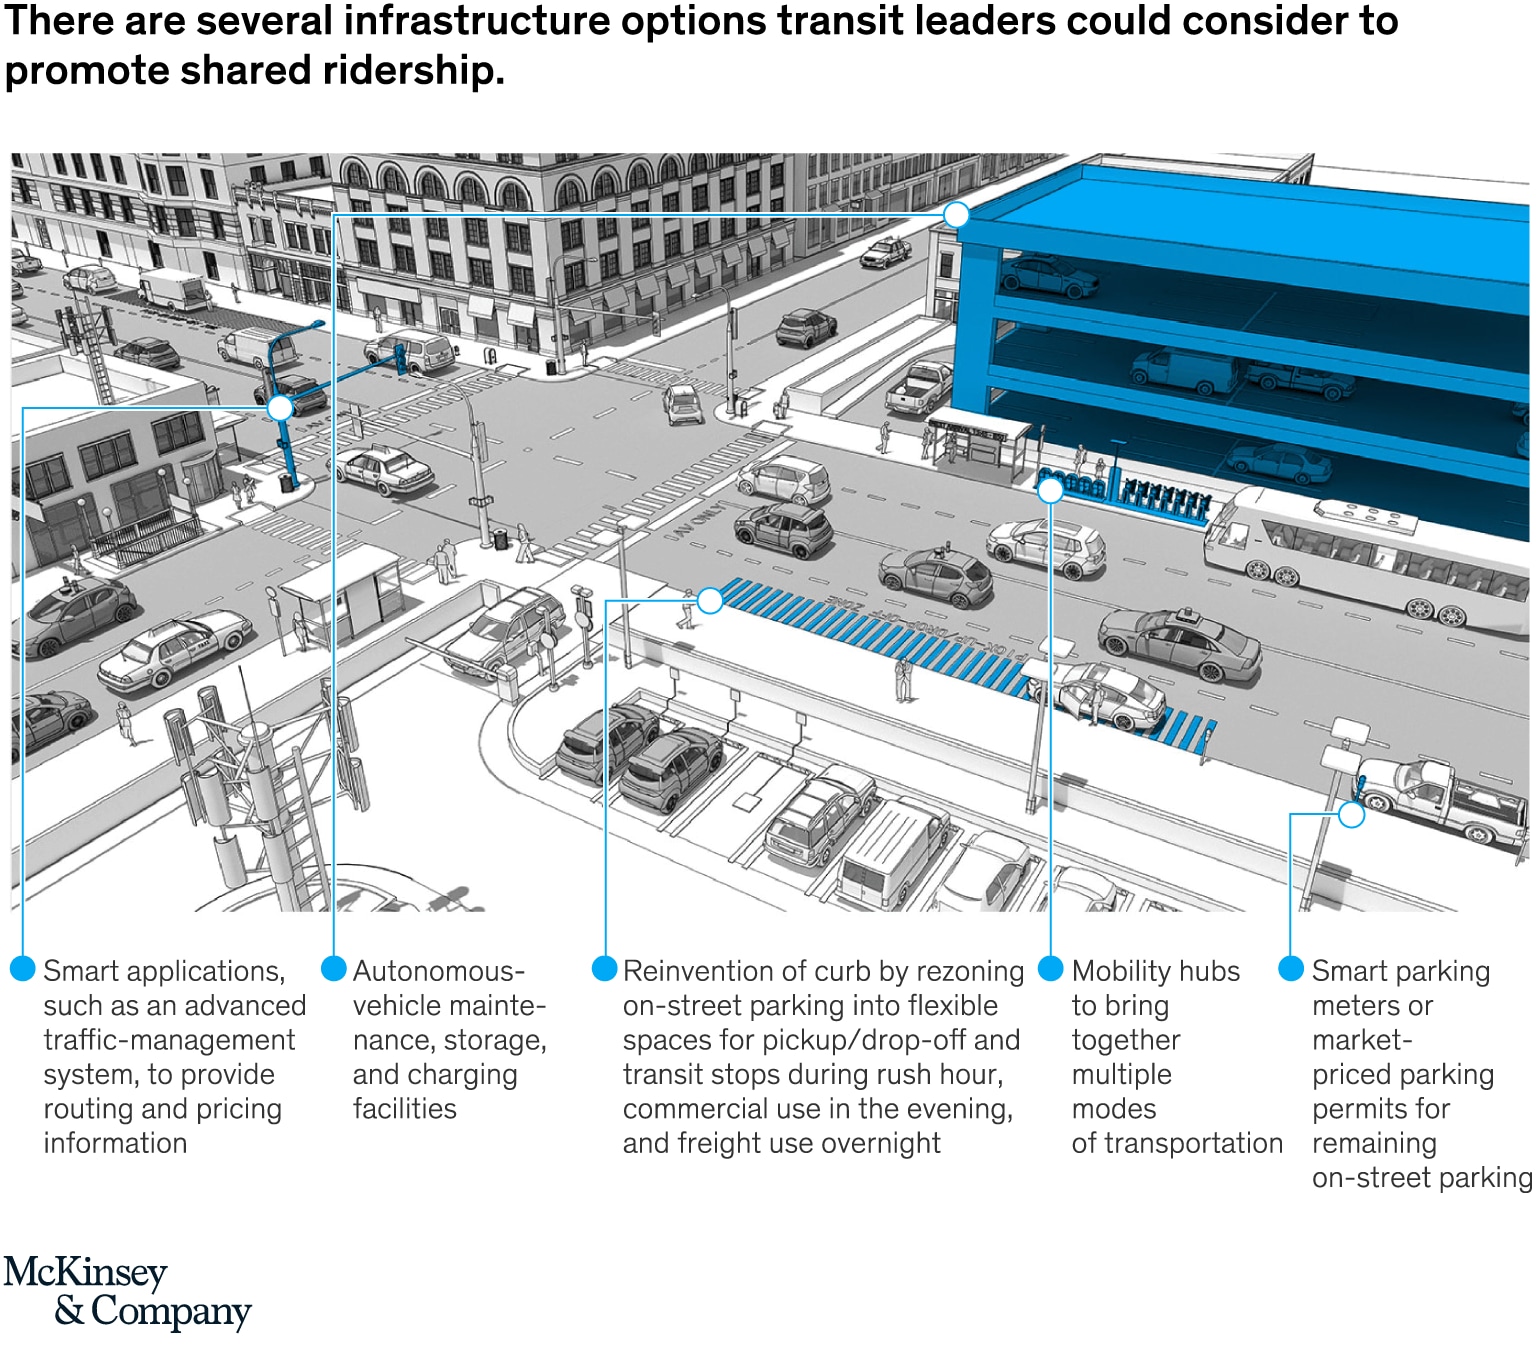 There are several infrastructure options transit leaders could consider to promote shared ridership.